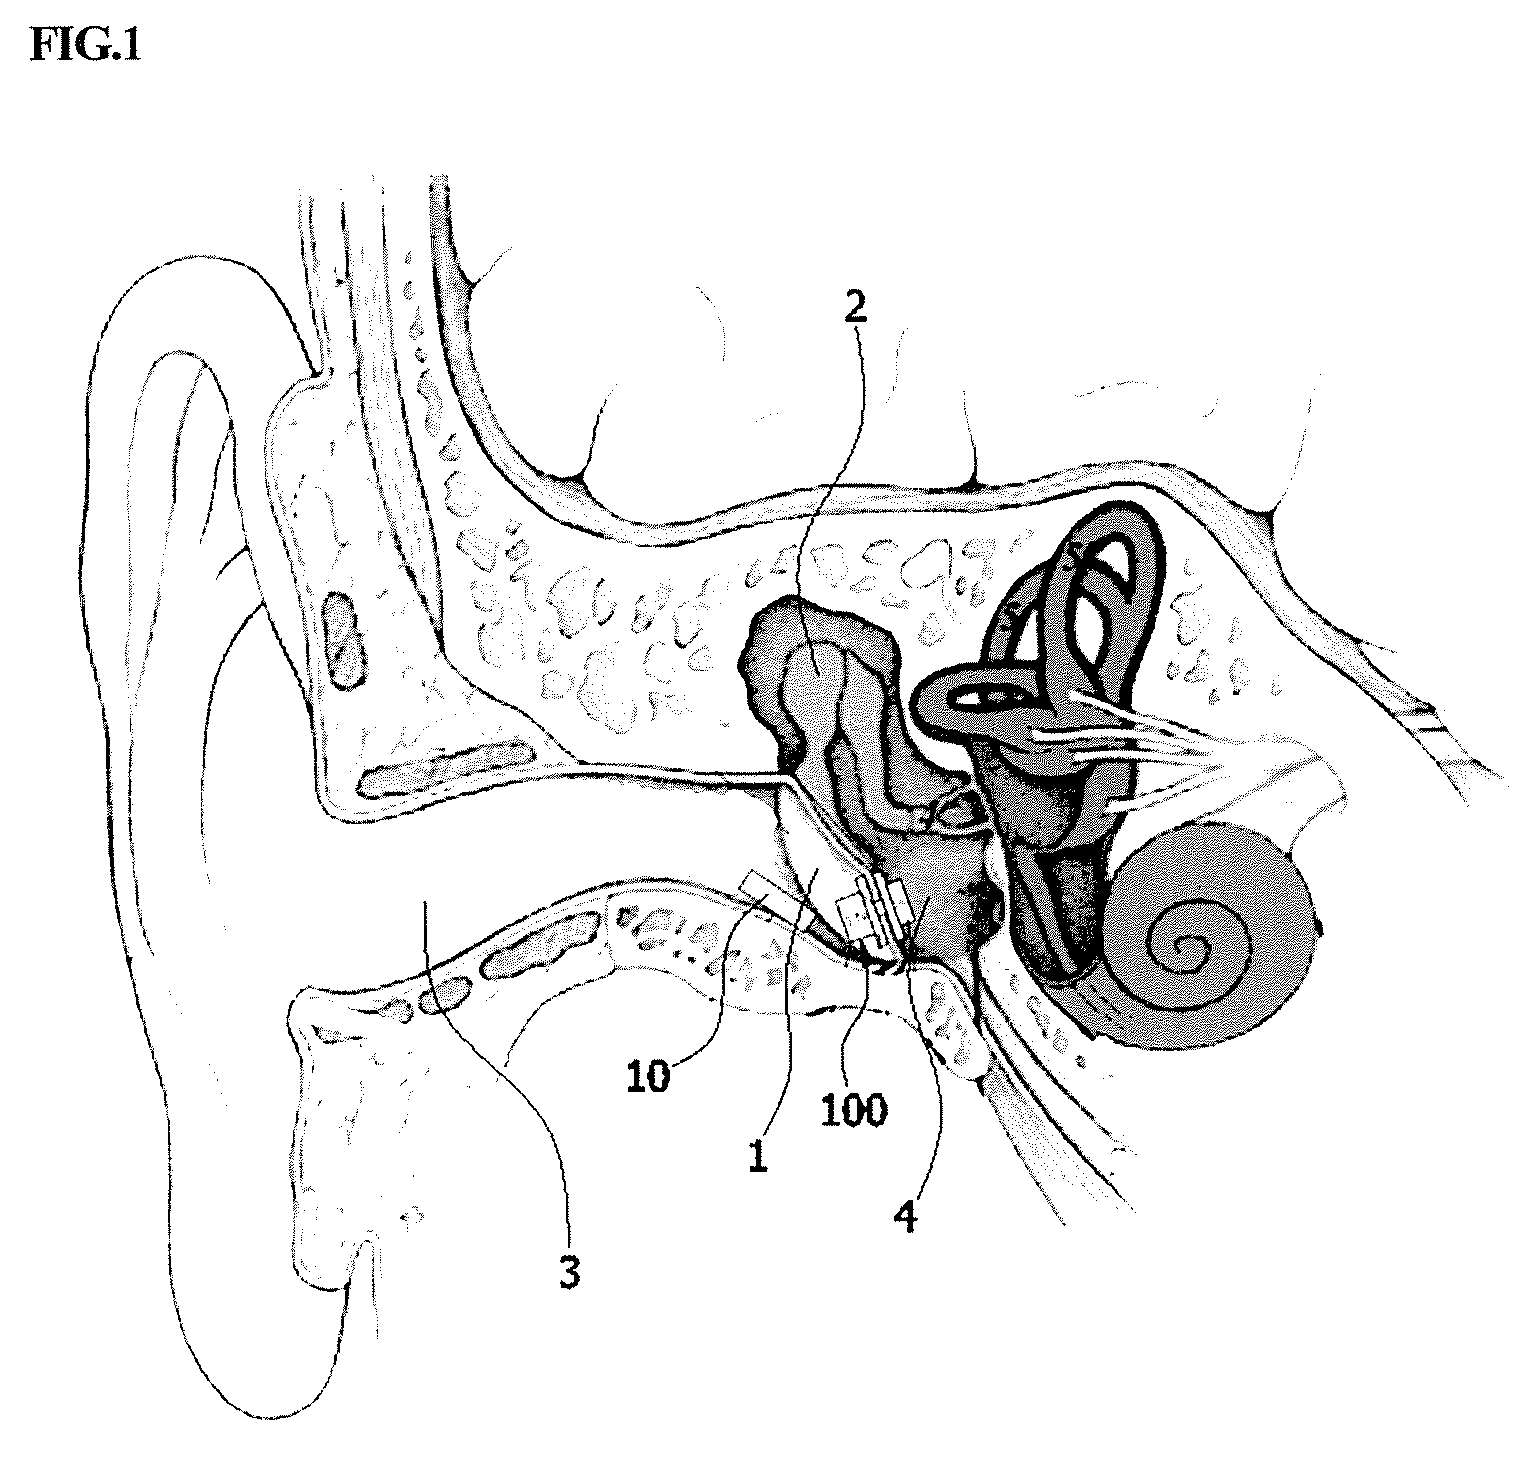 Transtympanic vibration device for implantable hearing aid and apparatus for installing the same